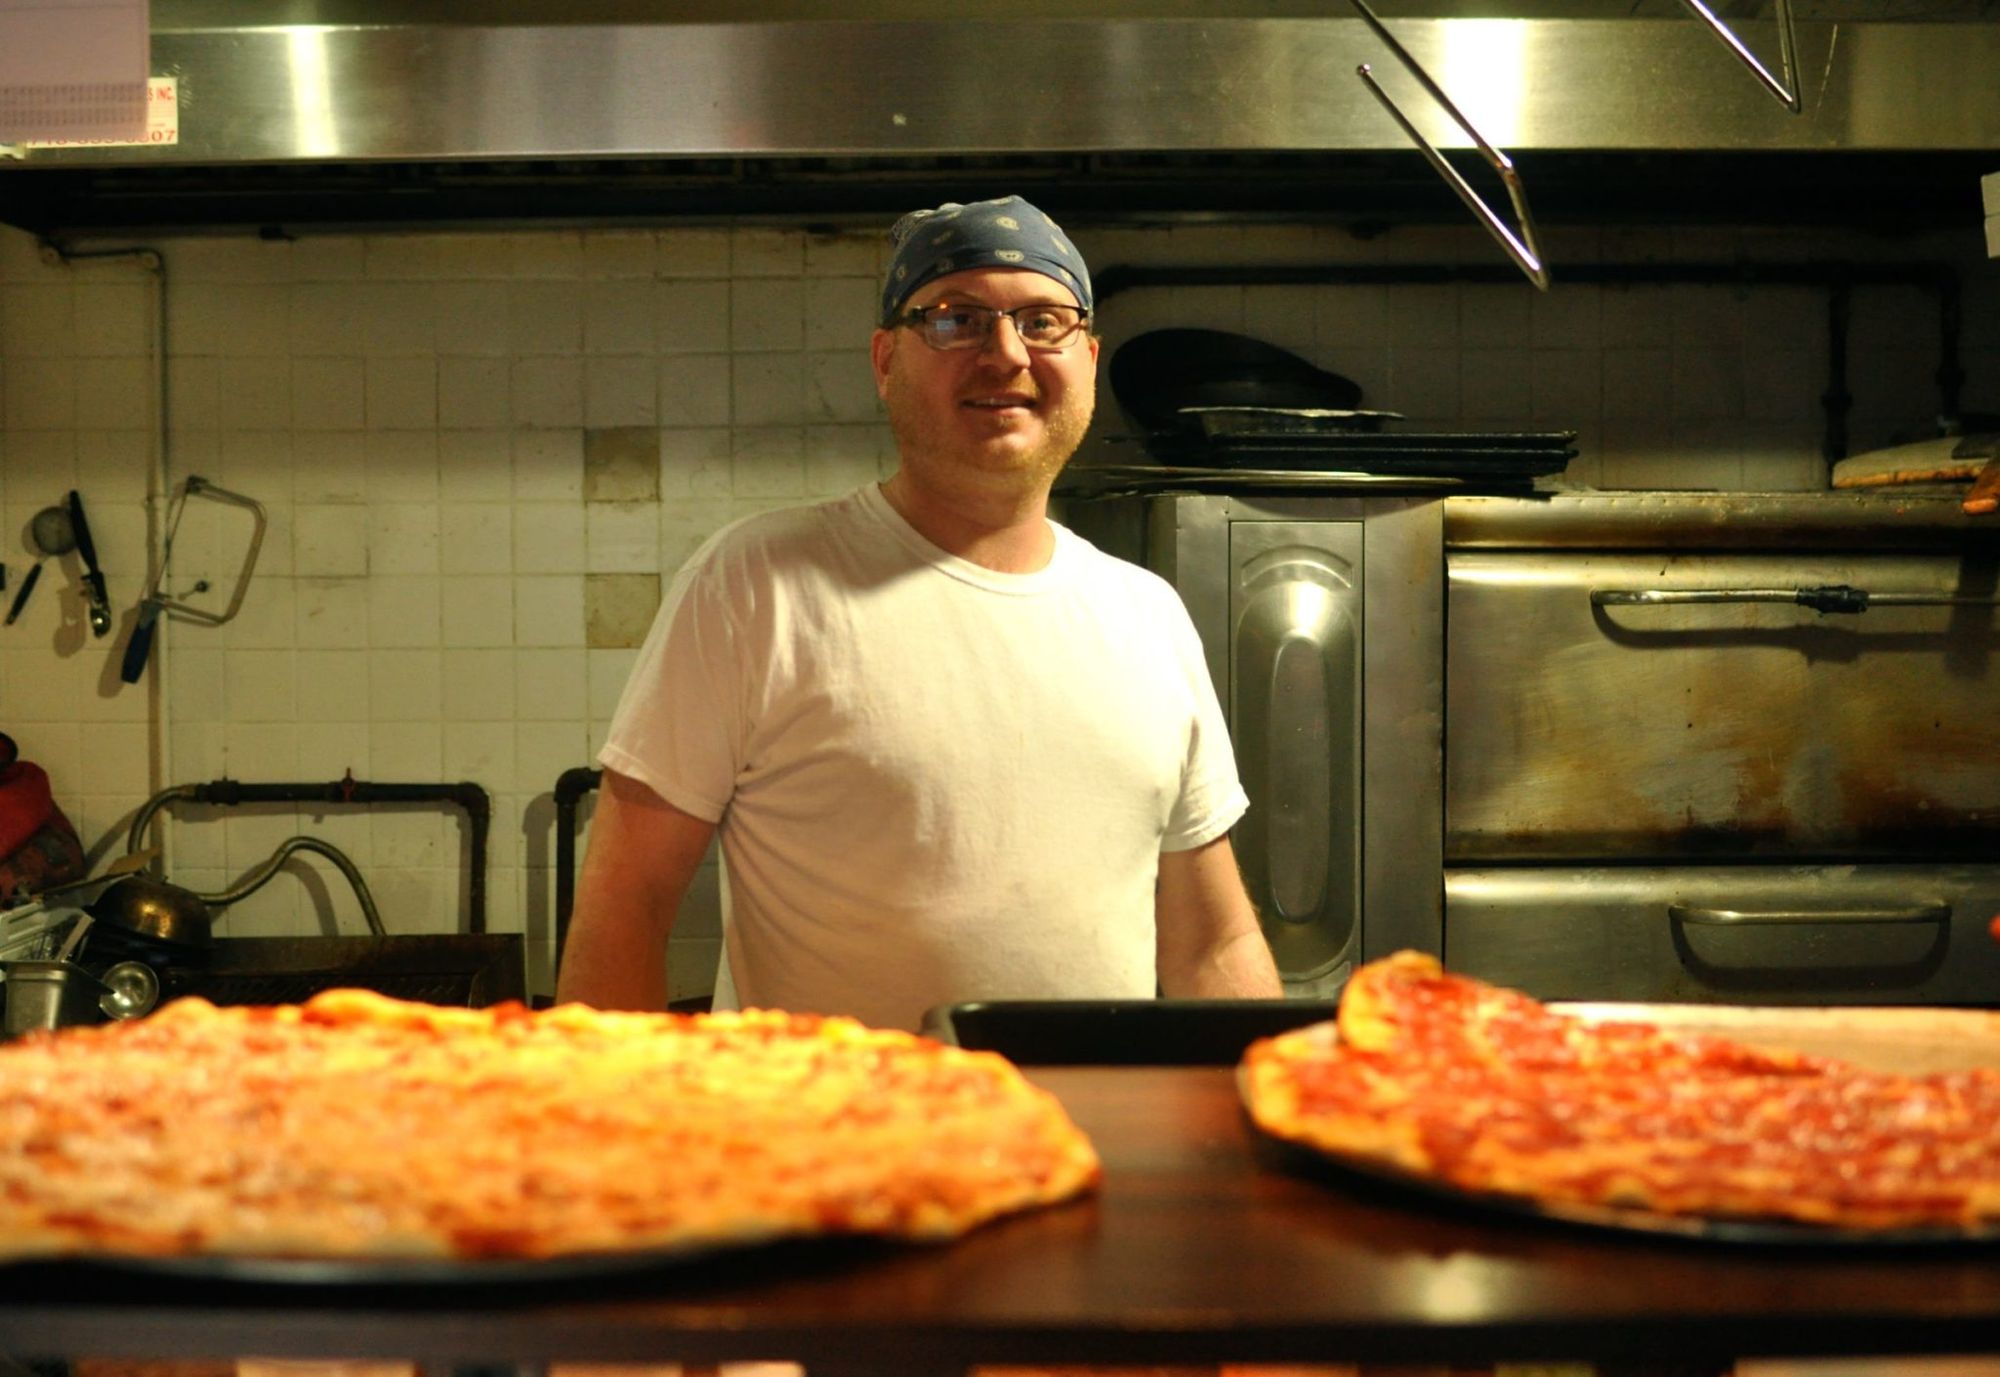 Meet T. J. O’Connor, The Chef Making Everything From Scratch At Pauline & Sharon’s Pizza